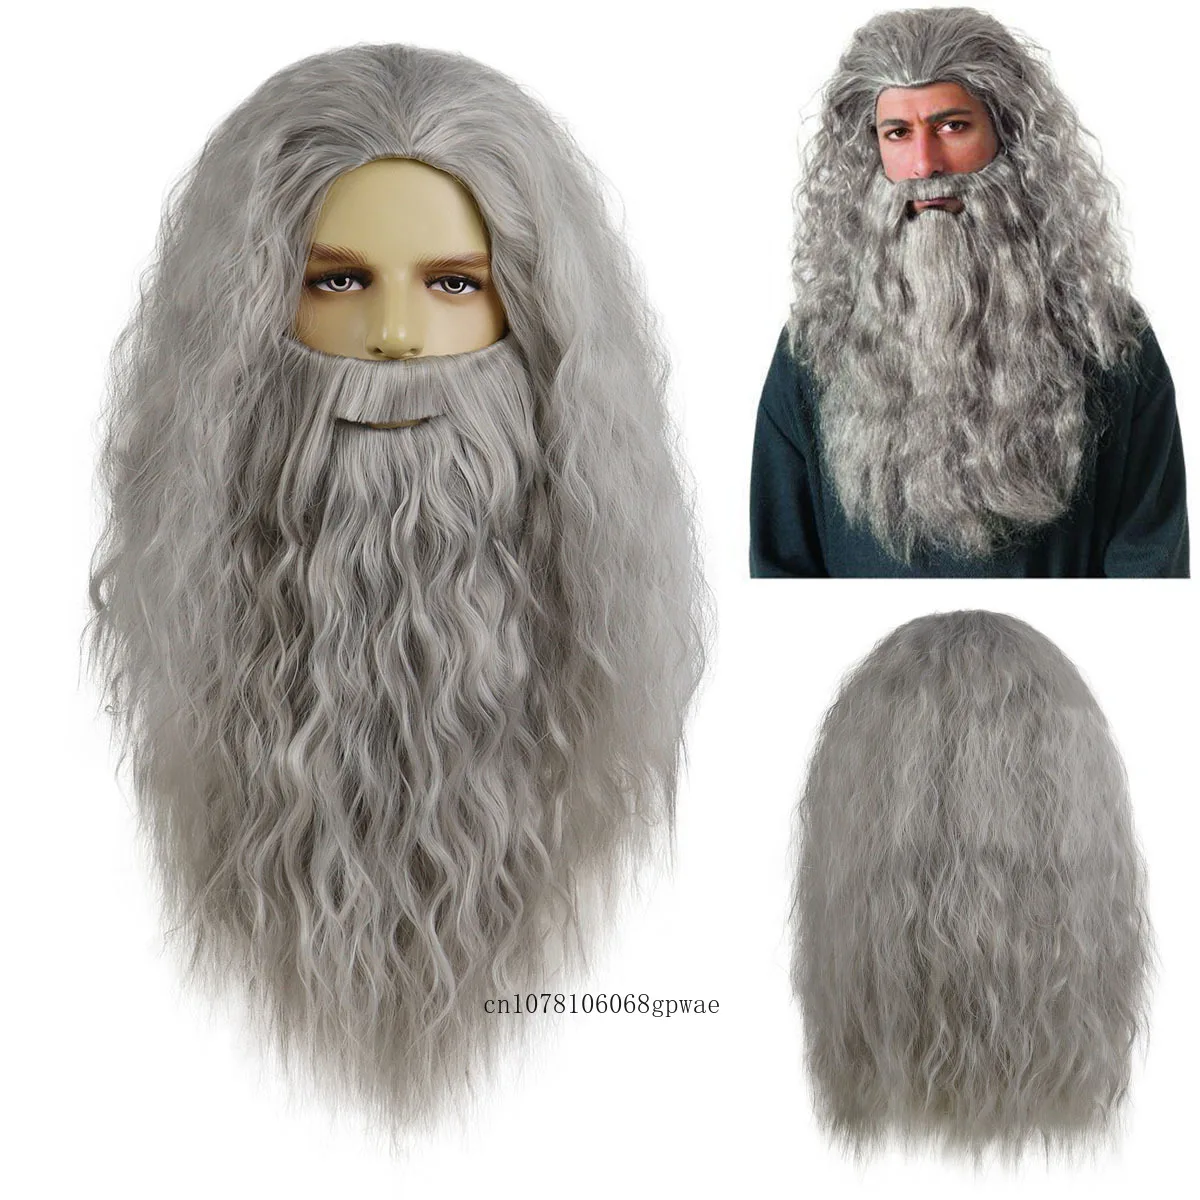 Dumbledore Cosplay Wigs Gandalf Mithrandir Grey Wig with Beard Heat Resistant Synthetic Long Curly Wave Hair Wig for Men Male